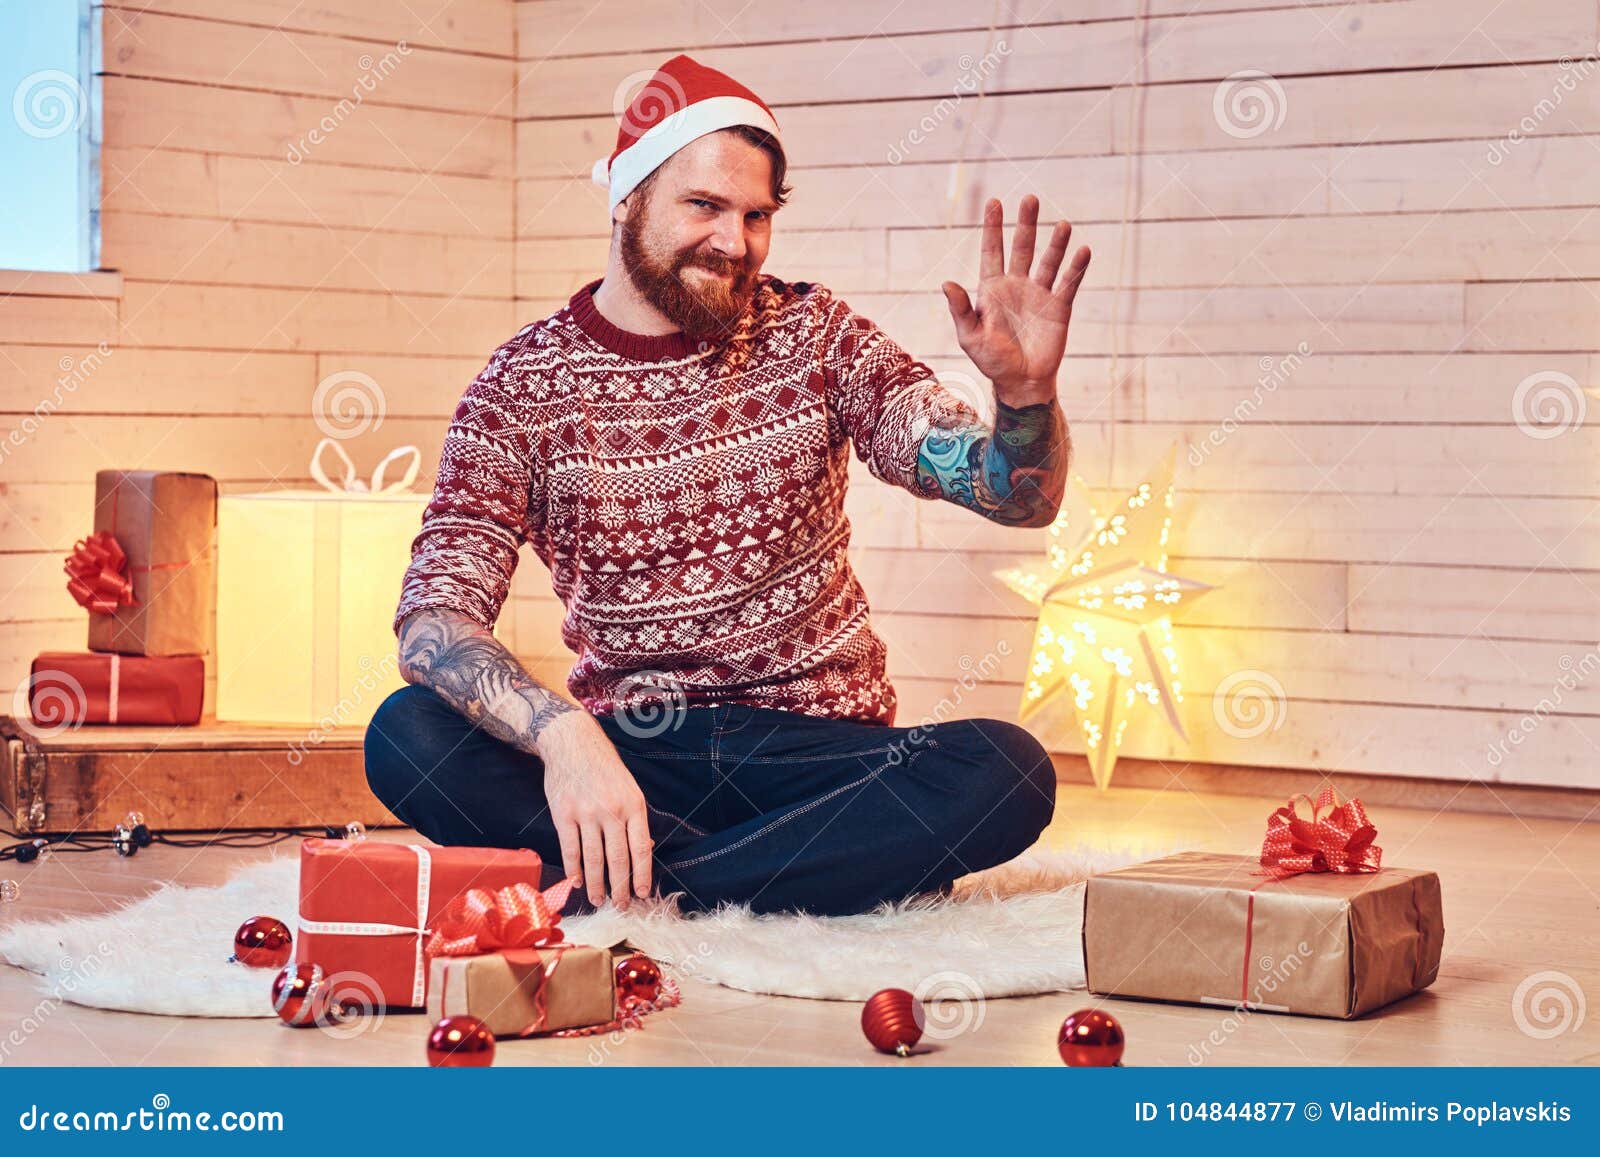 A Man In A Room With Christmas Decoration. Stock Image - Image of